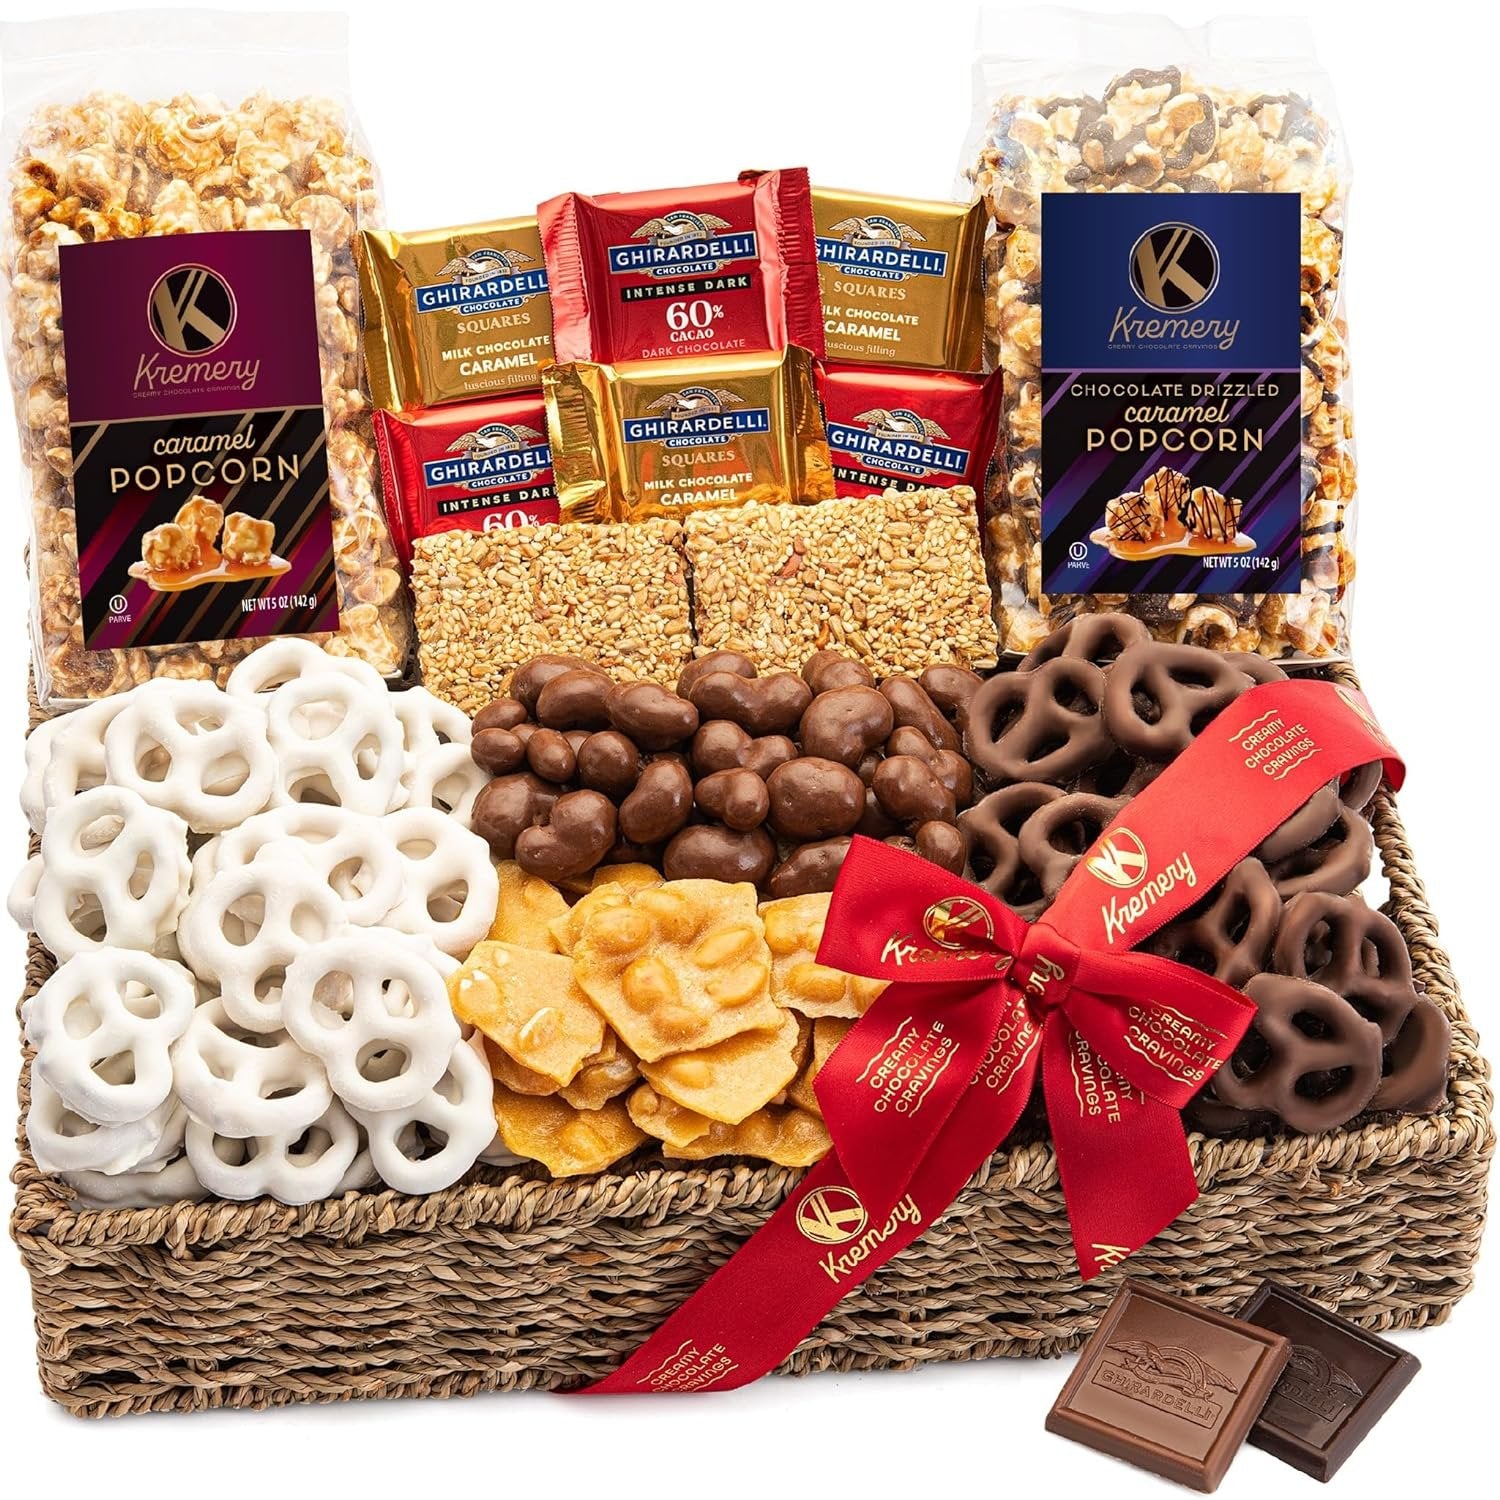 Milk Chocolate Covered Assorted Gift Basket In Seagrass Tray (Large)